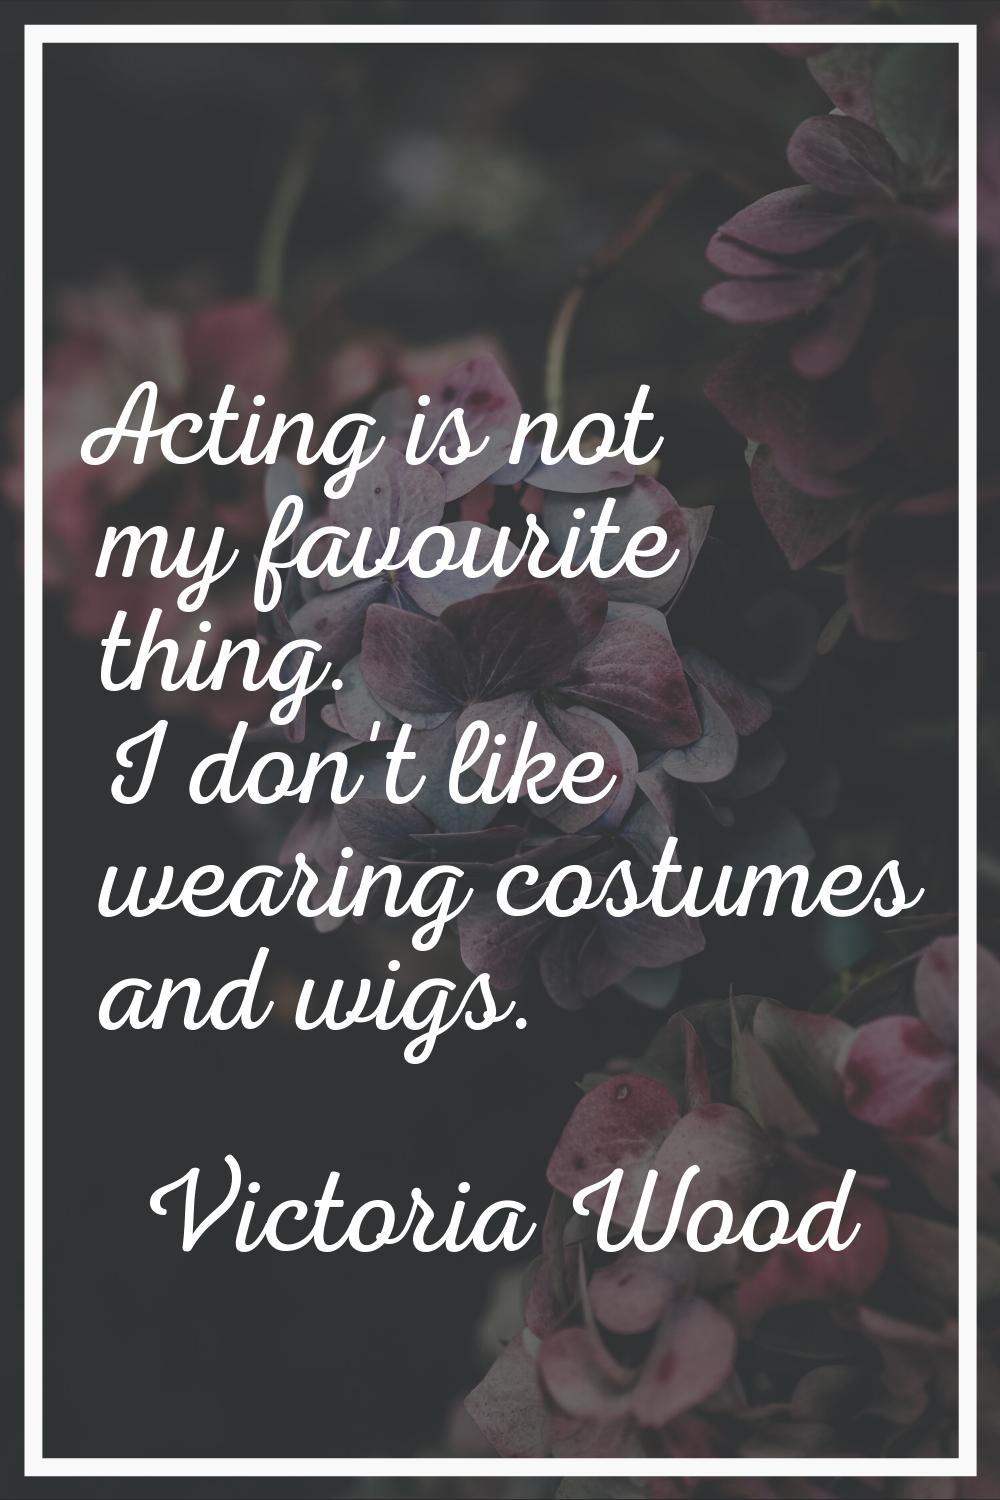 Acting is not my favourite thing. I don't like wearing costumes and wigs.